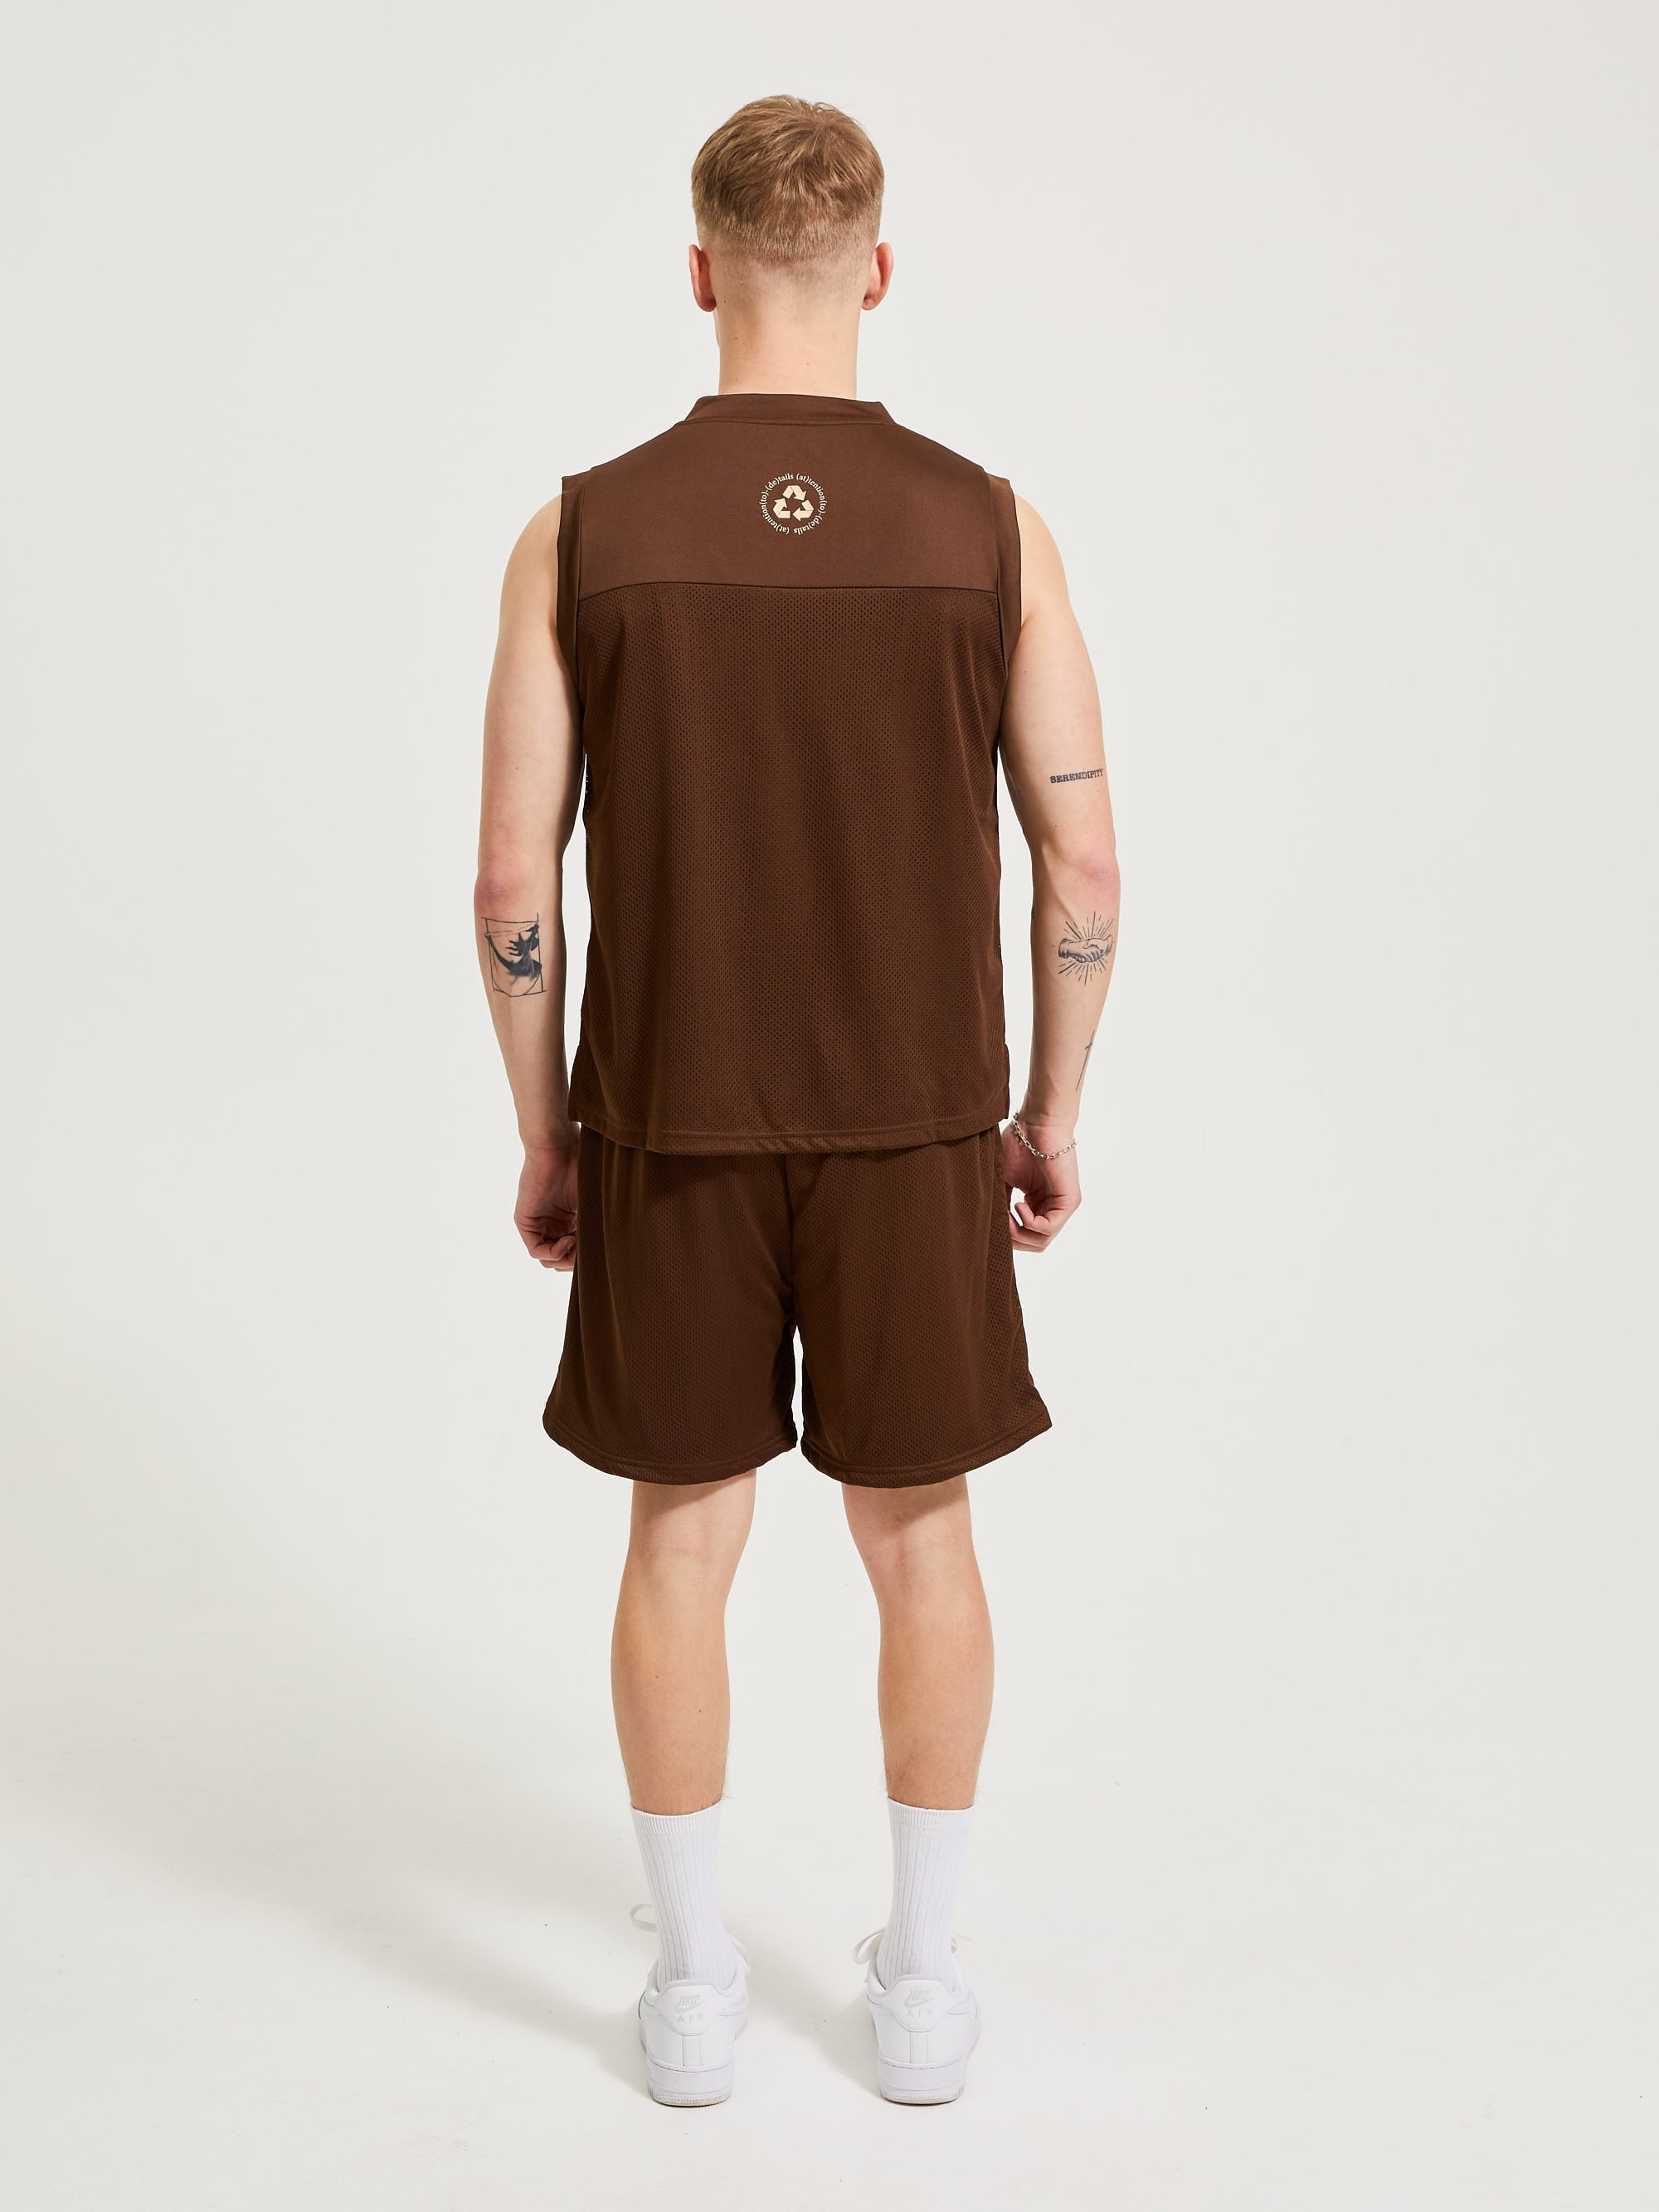 CASUAL SPORTS TANK TOP BROWN - ATTODE